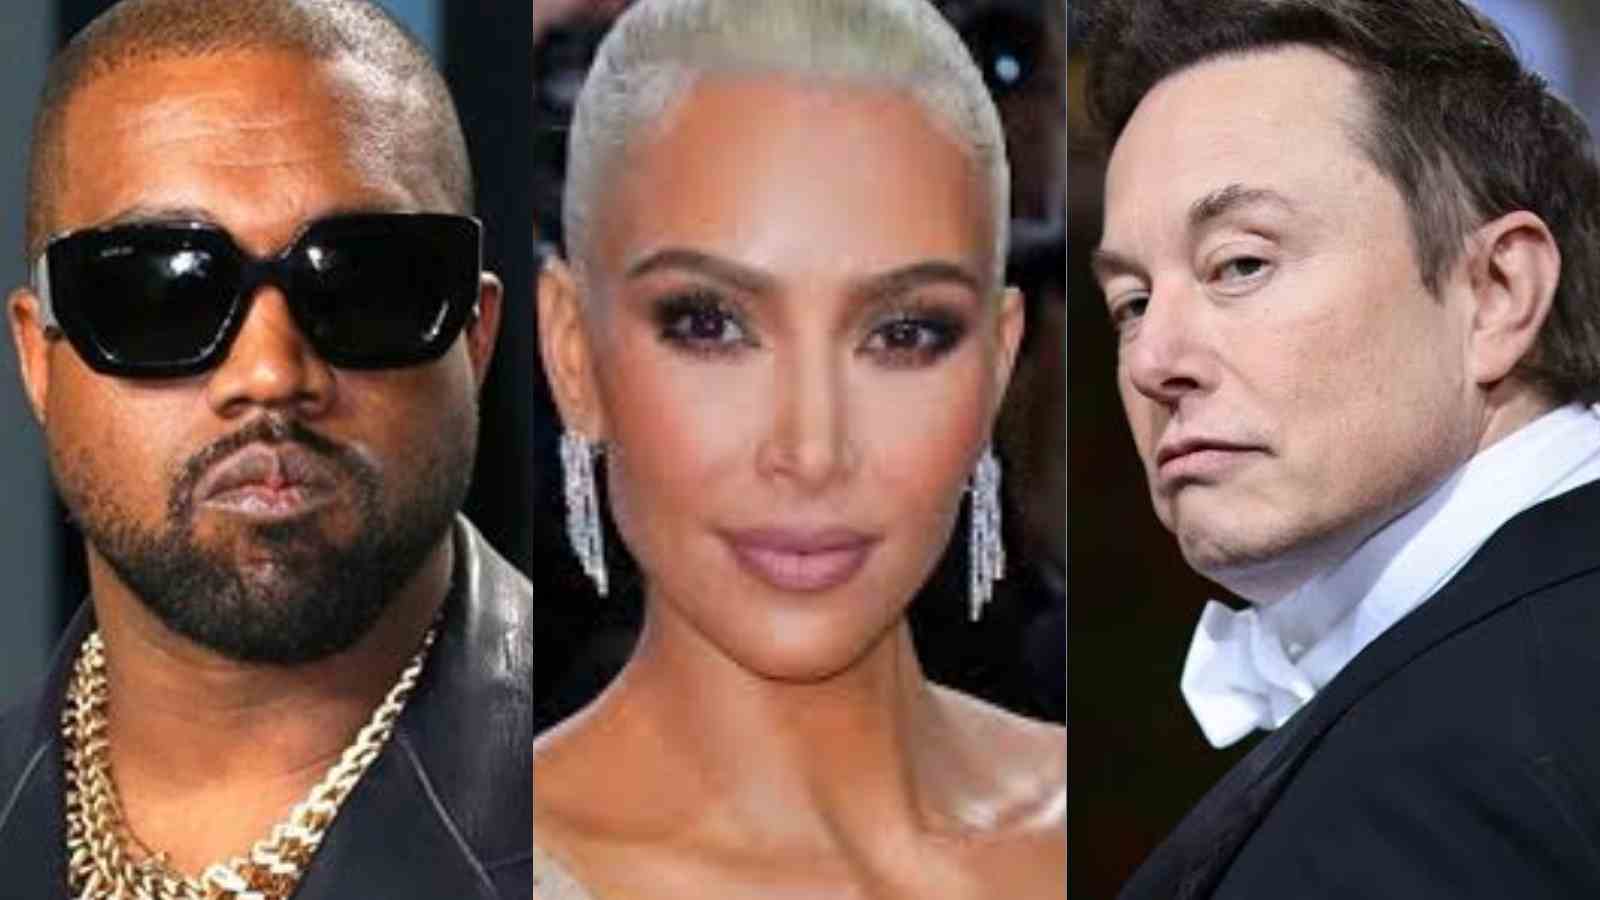 Kanye West, Kim Kardashian, and Elon Musk are also the most Googled people in 2022